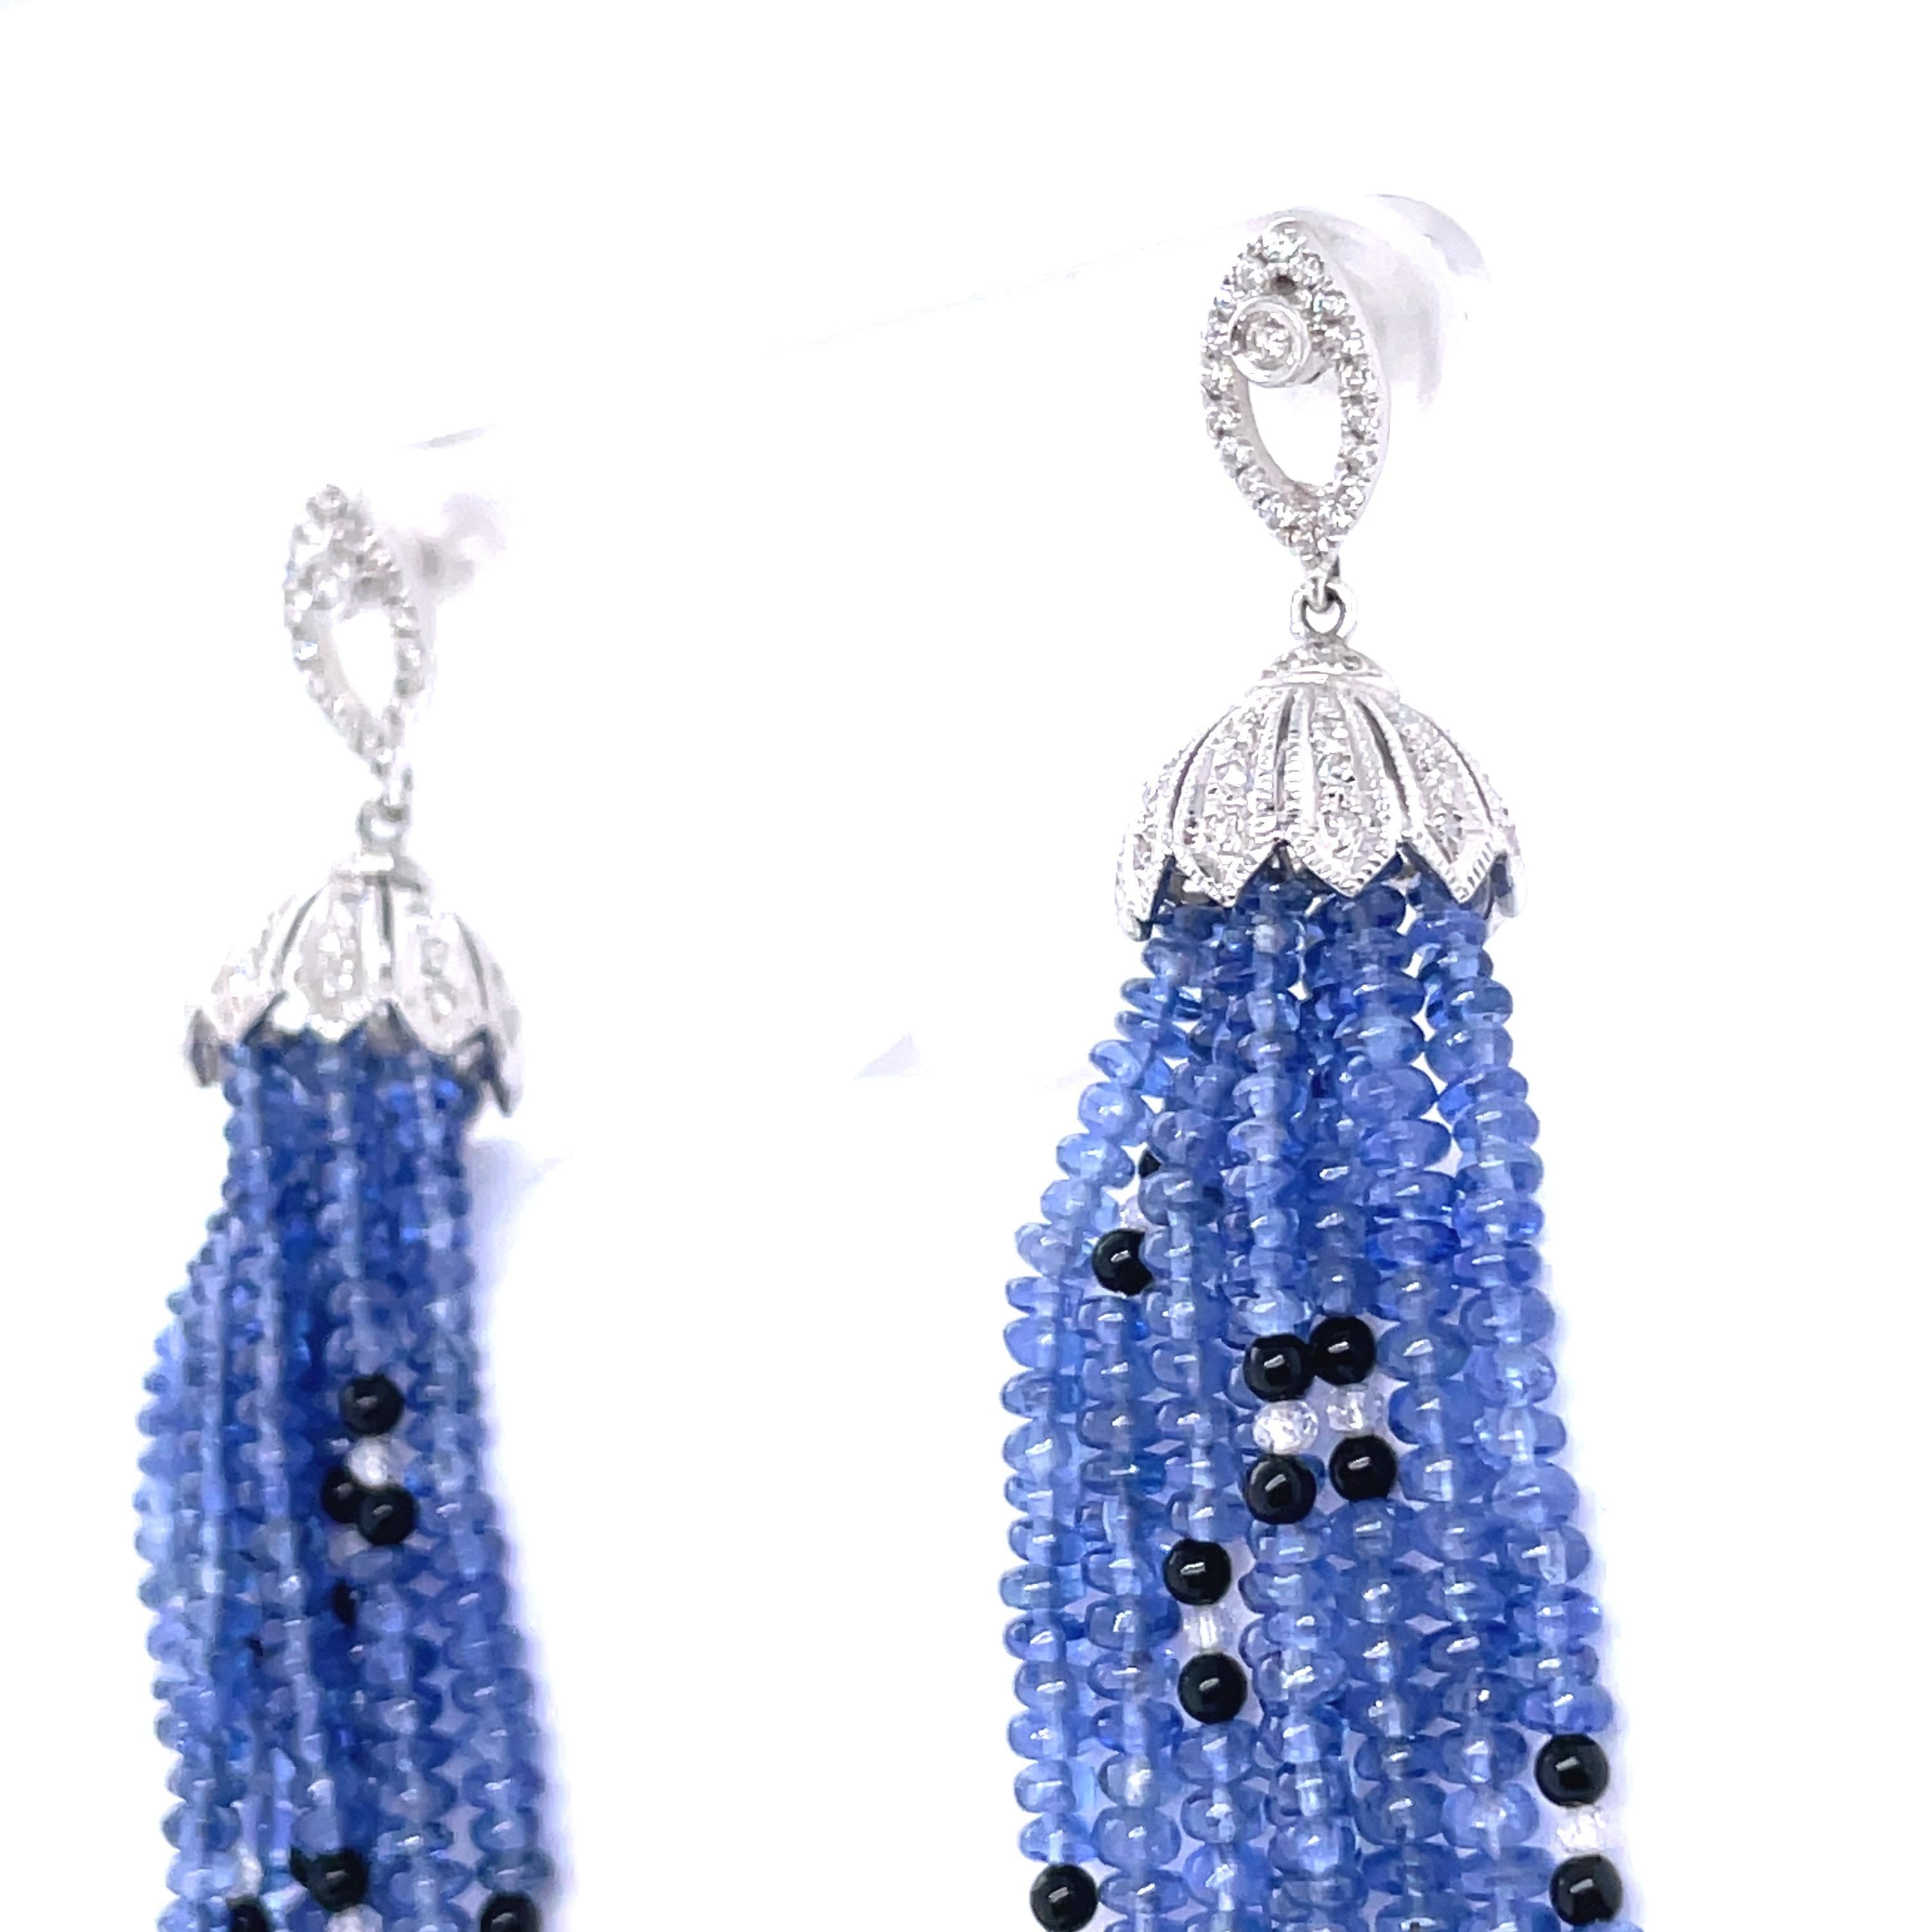 Contemporary Sapphire Beads Cts 79.34 Black Onyx and Diamond Beads Cts 1.74 Earrings For Sale